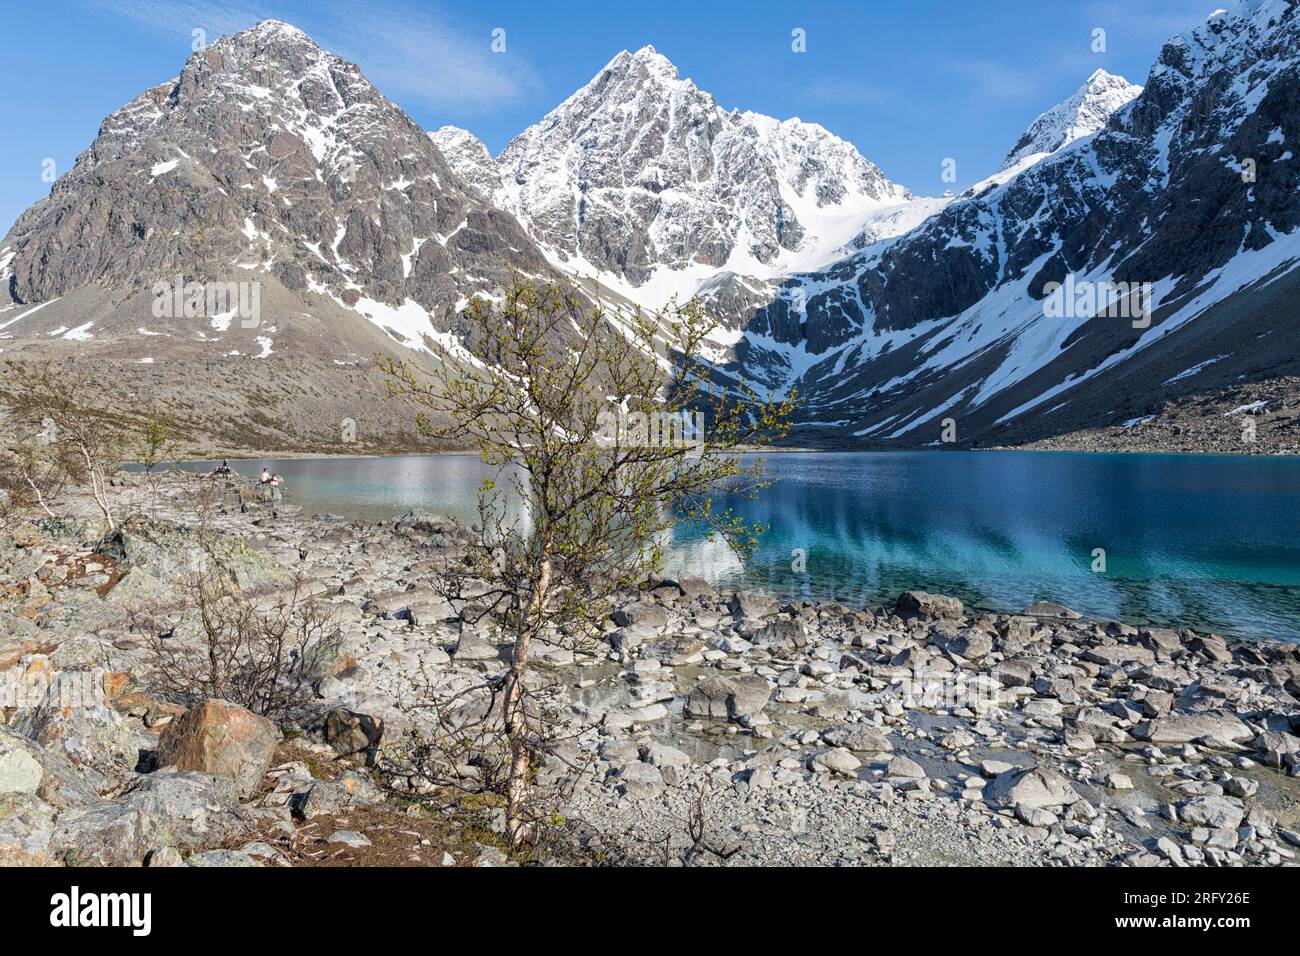 The surrounding, steep, snow-capped mountains are reflected in the intense blue water of Blåisvatnet. Lyngen Alps, Troms og Finnmark, Northern Norway Stock Photo